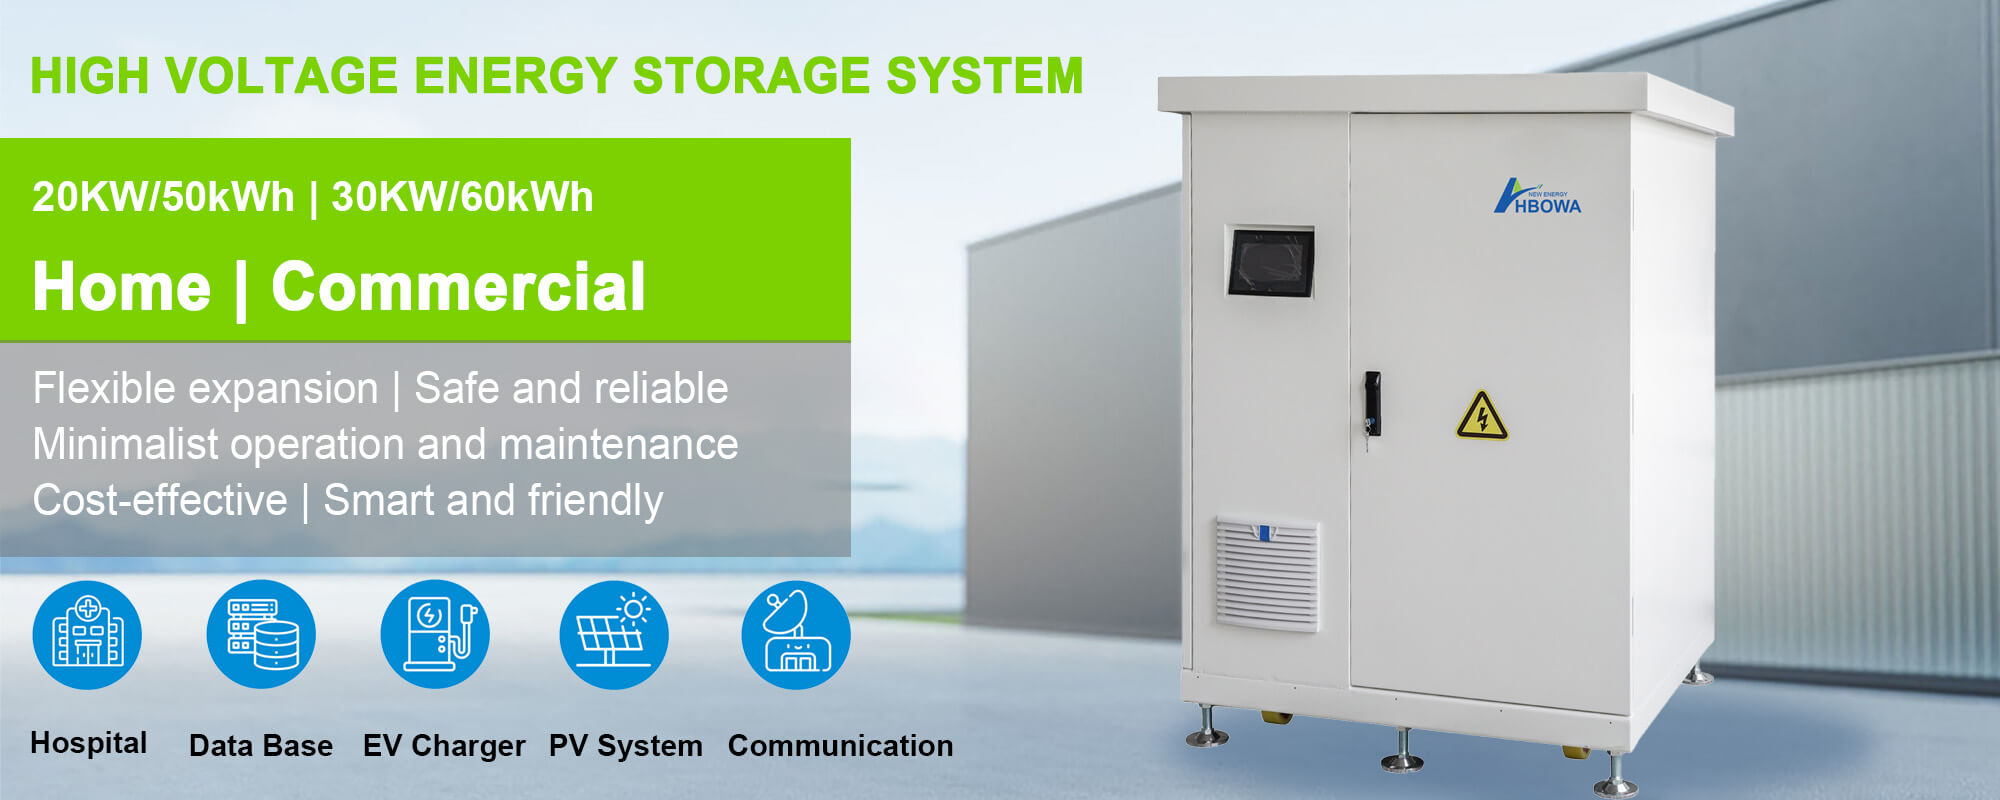 high voltage energy storage system cabinet - HBOWA New Energy